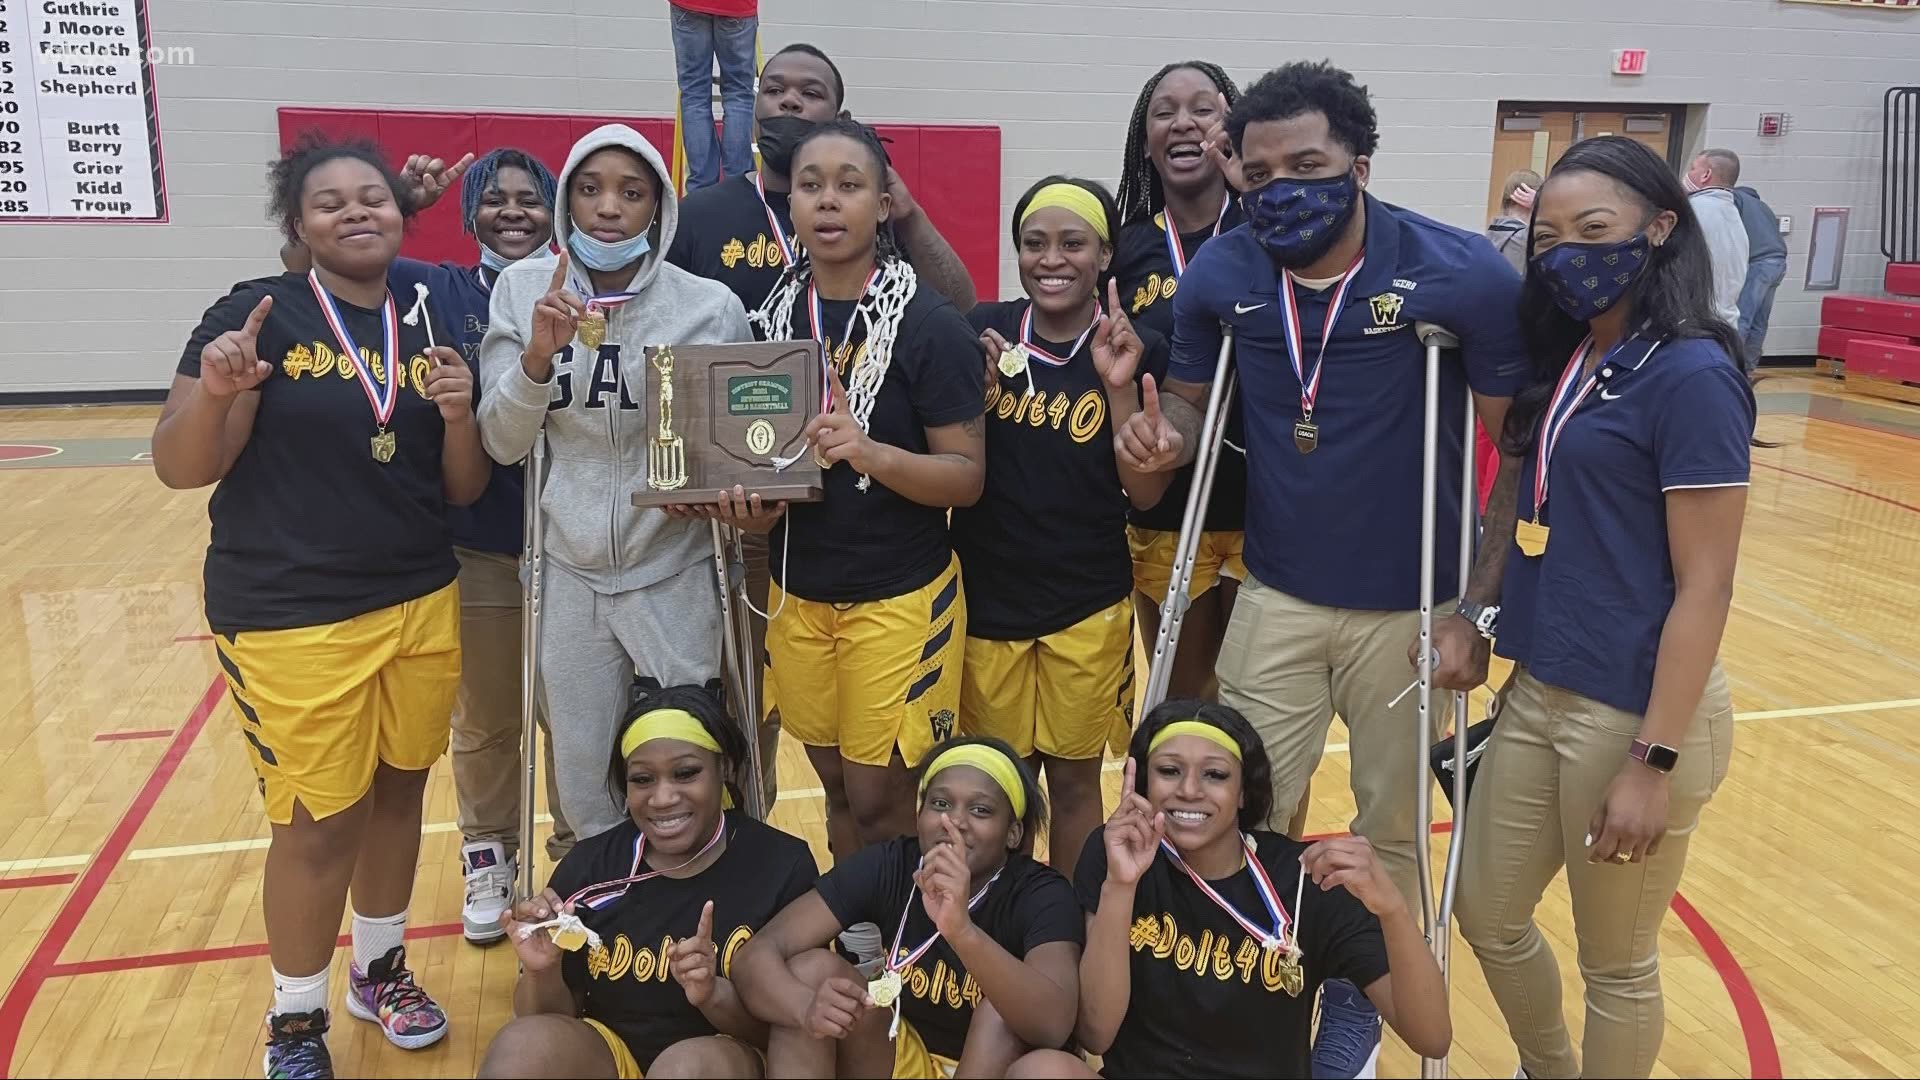 Warrensville Heights' girls basketball team overcame a legacy of losing and the shooting of their head coach to put together a remarkable season.